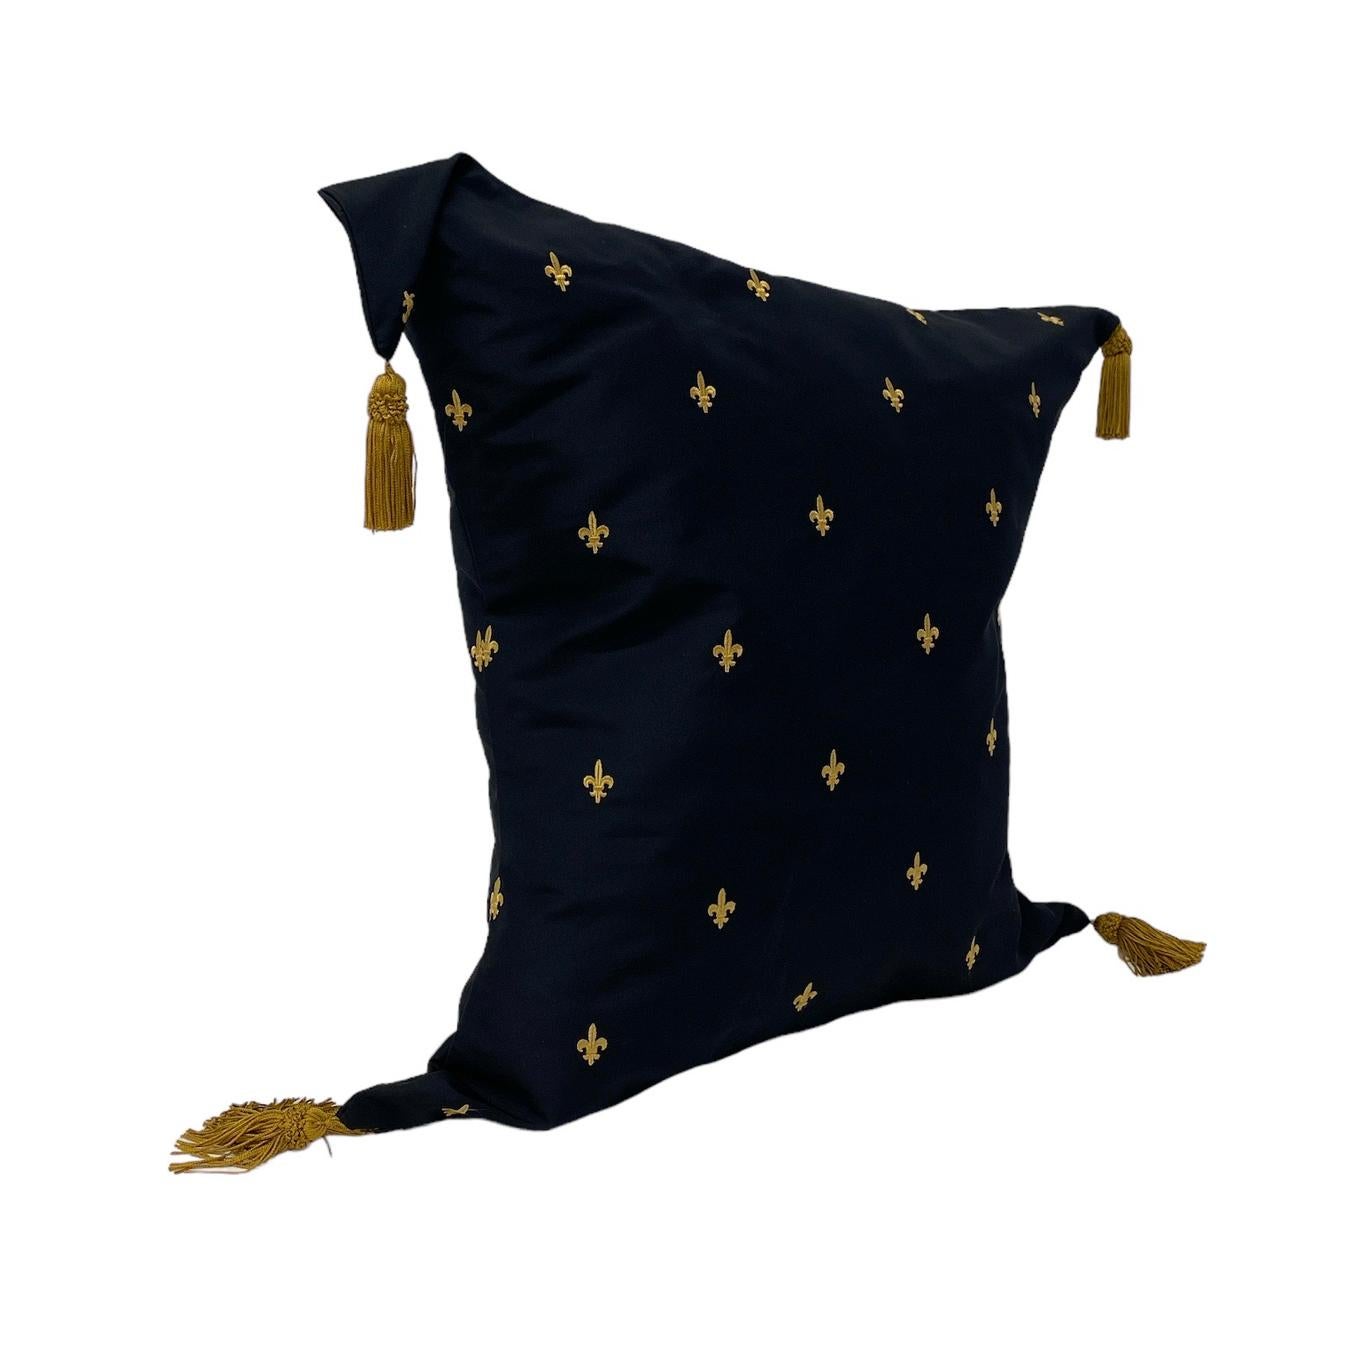 Midnight Black & Gold Fleur-de-Lis Pattern Decorative  Asymmetrical Pillow 
Sumptuous black is further enriched by meticulously embroidered gold fleur-de-lis and lavish corner tassels.  Luxurious comfort to tempt even the most capricious